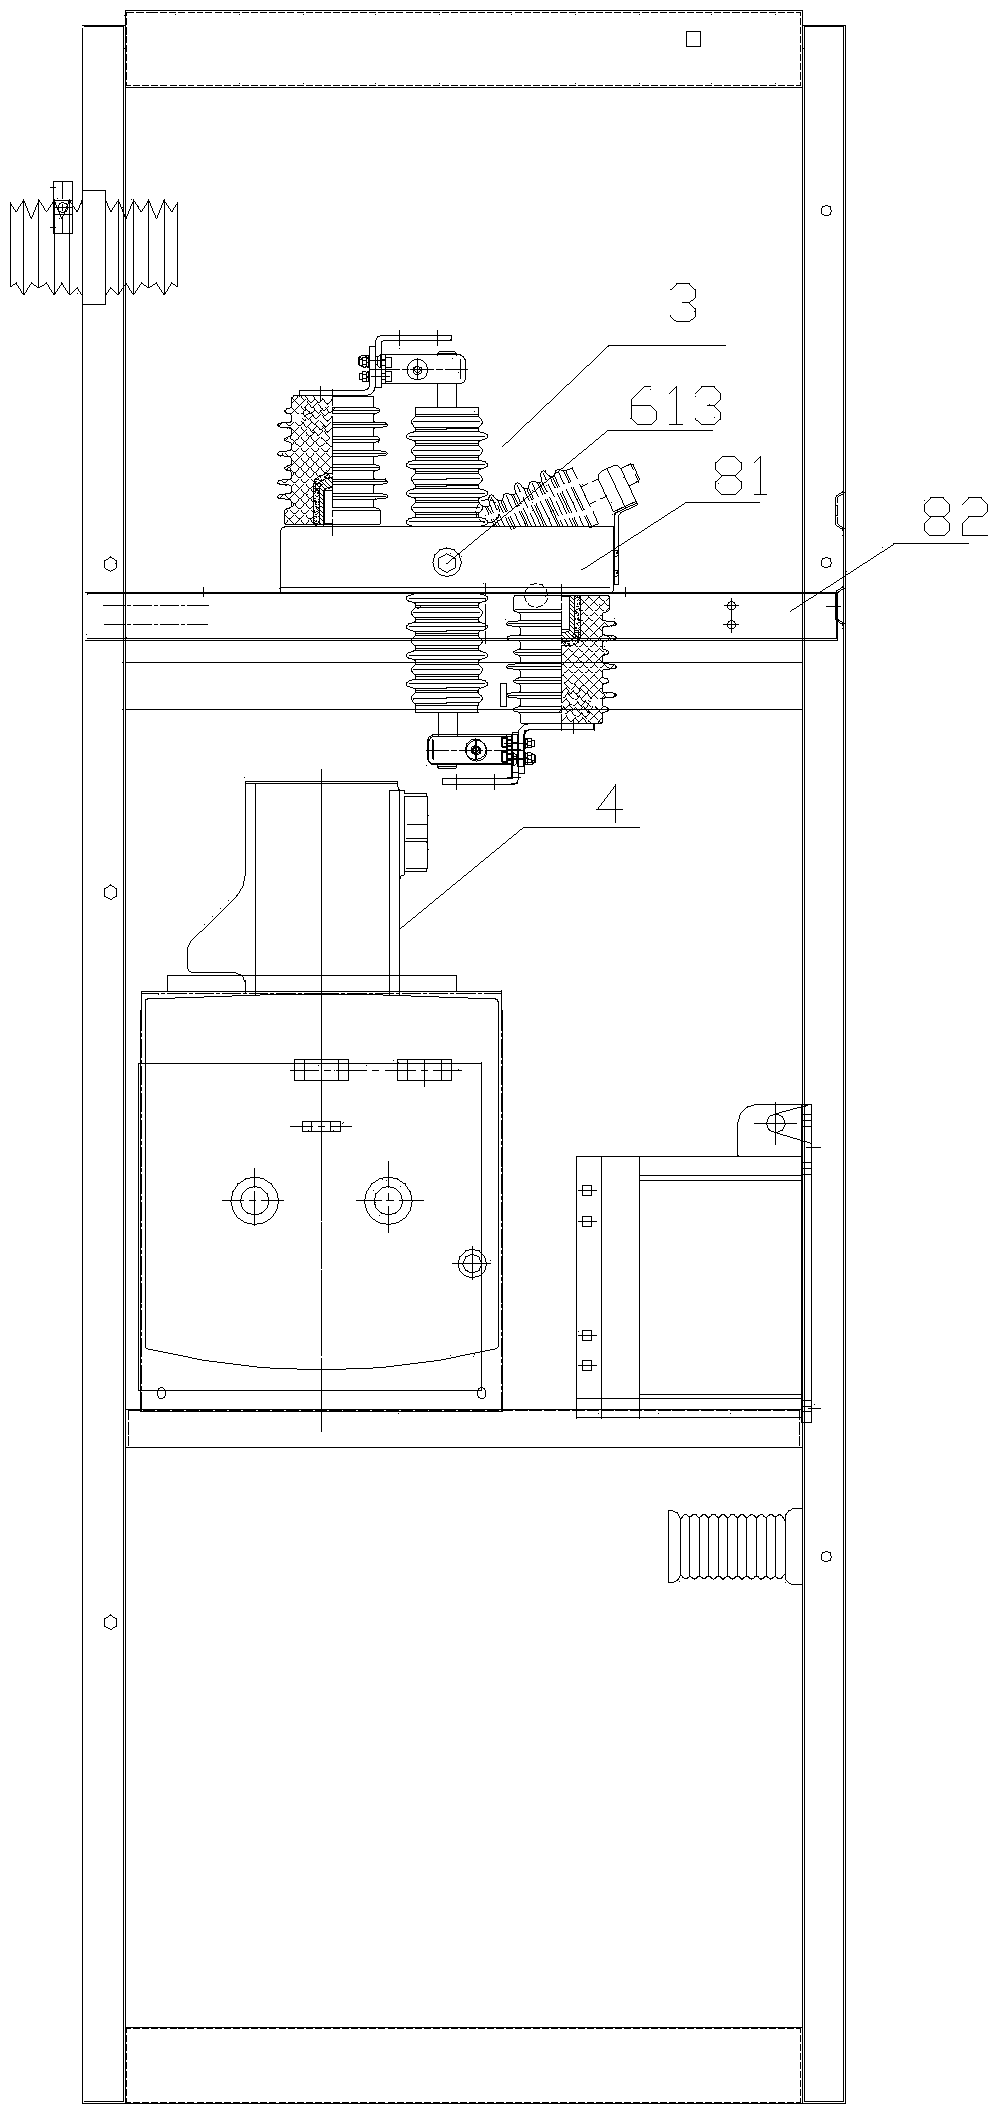 Disconnecting switch and interlocking mechanism of circuit breaker